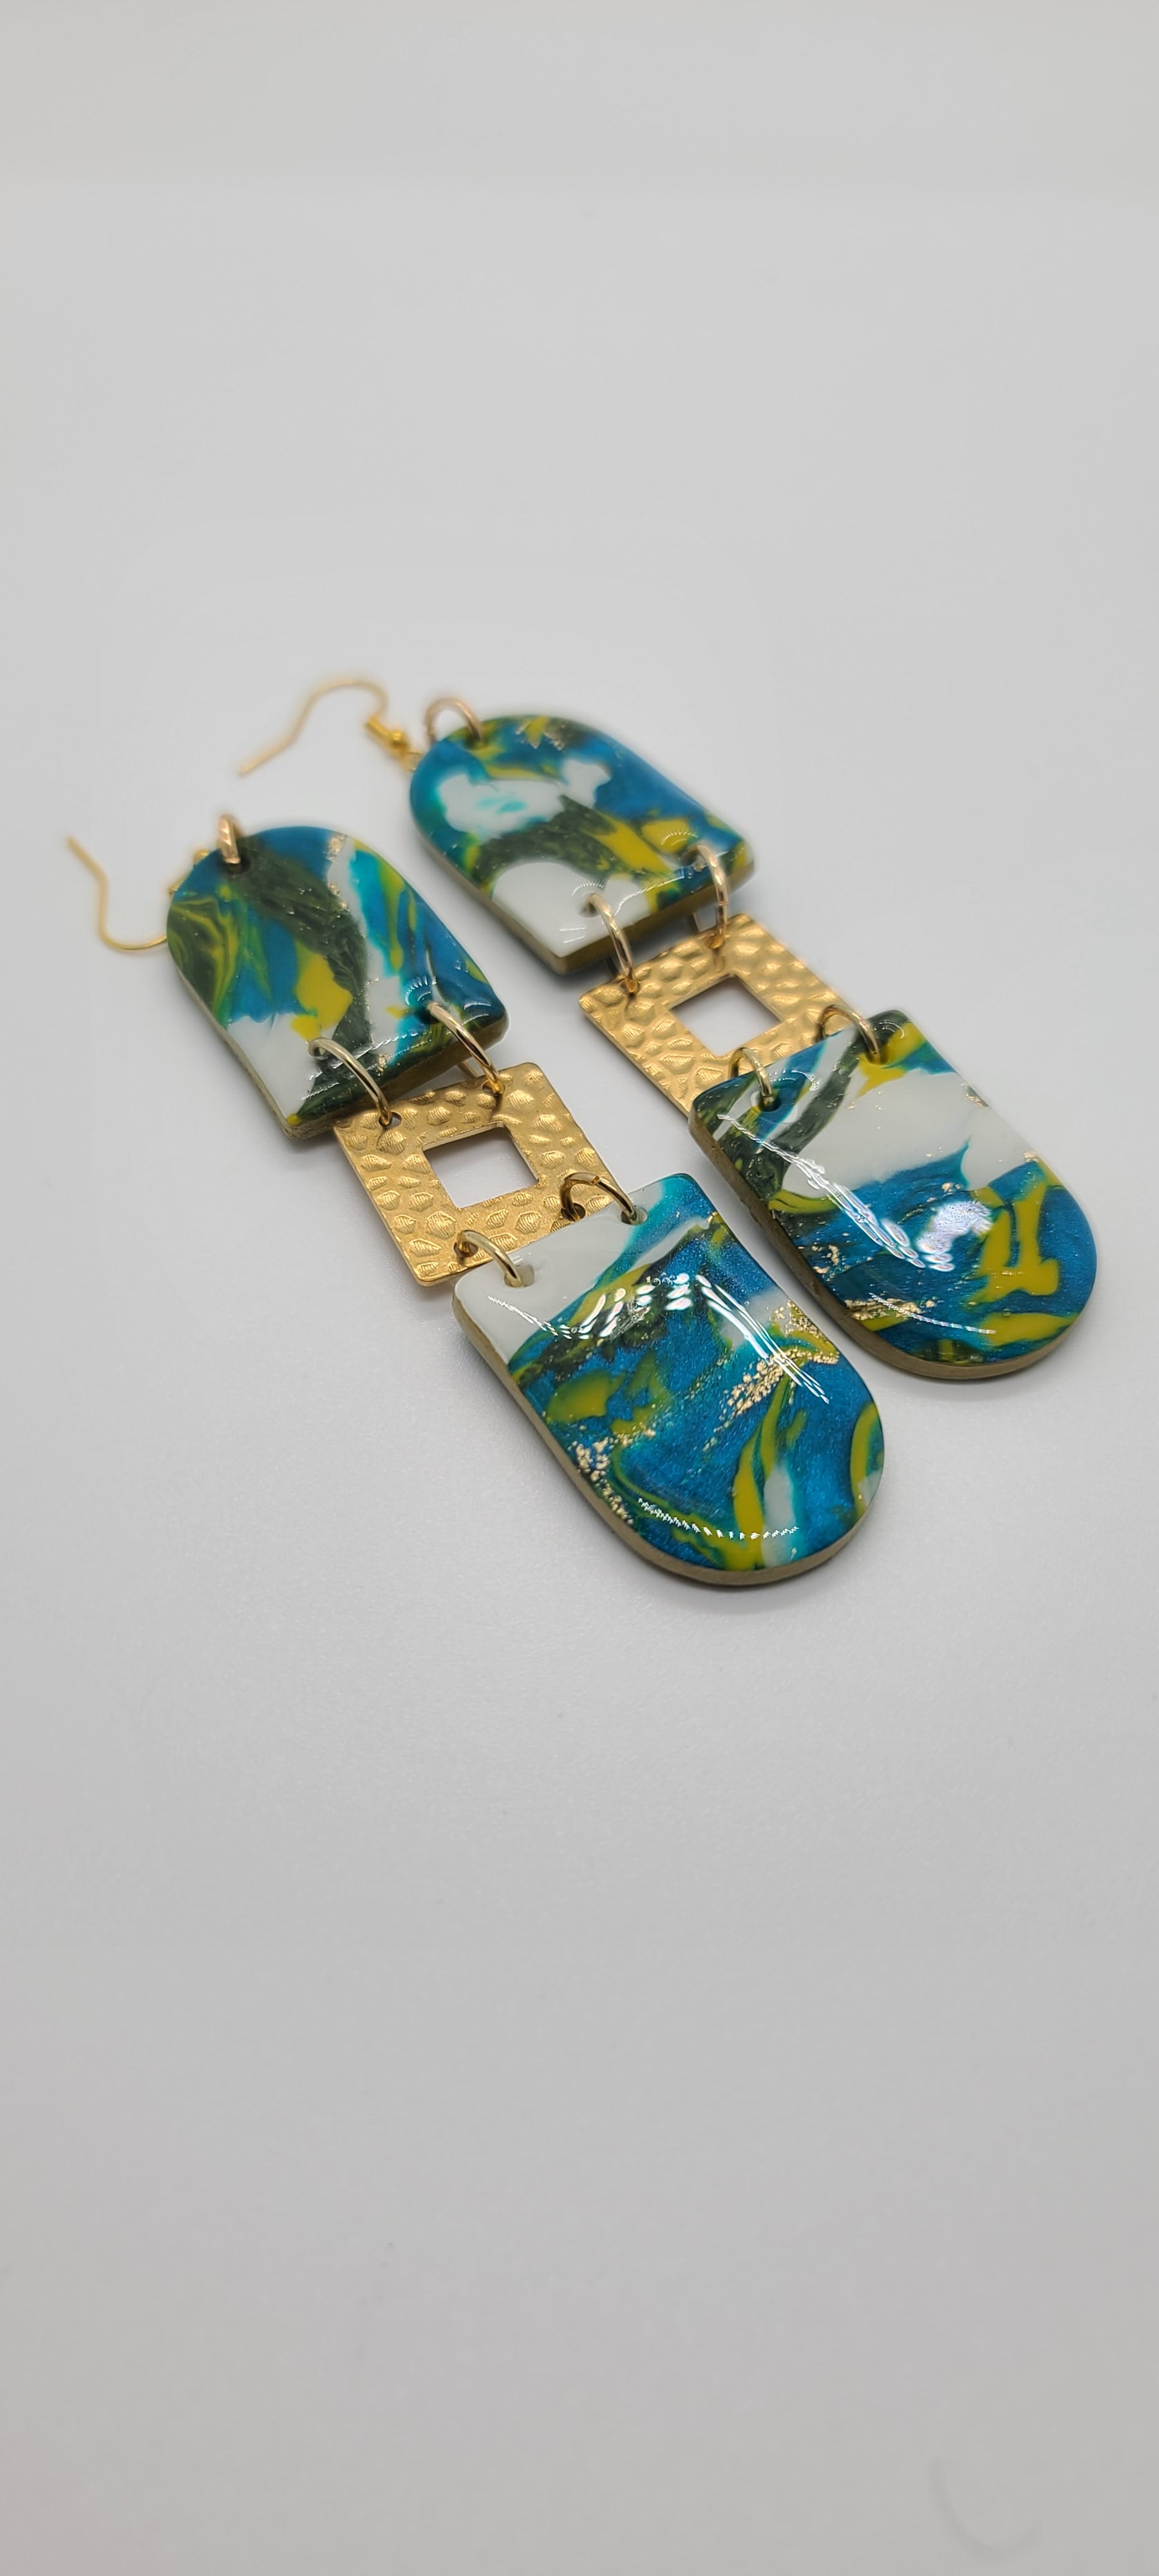 Length: 4.5 inches | Weight: 0.8 ounces  Distinctly You! These earrings are made with U-shape polymer clay in aqua yellow gold white green, and gold squared hammered charms.